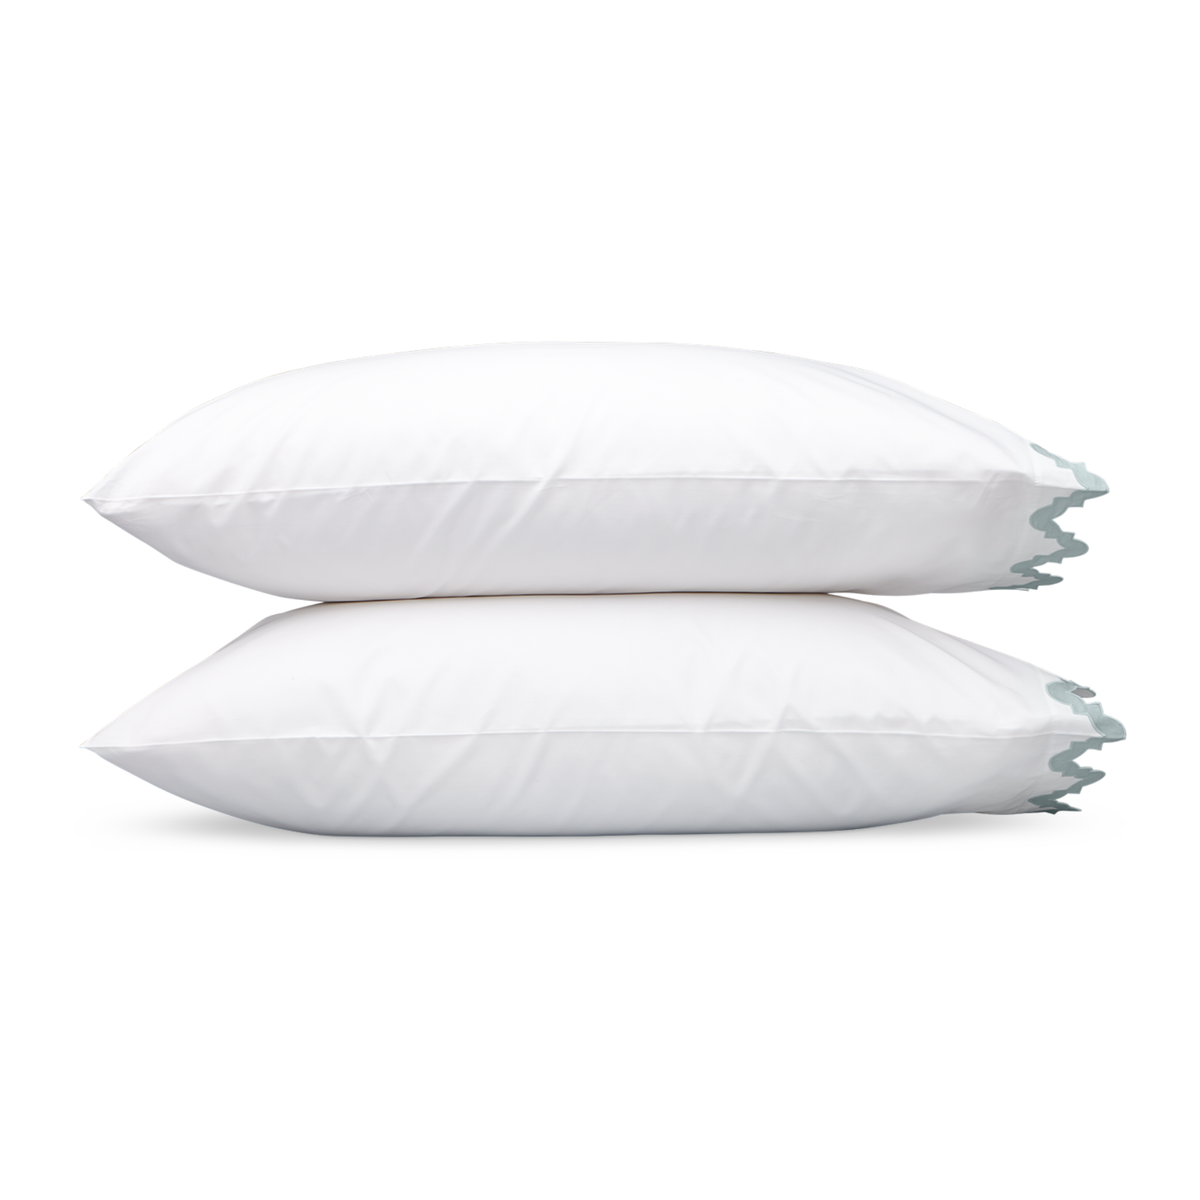 Pair of Pillowcases of Matouk Aziza Bedding in Pool Color